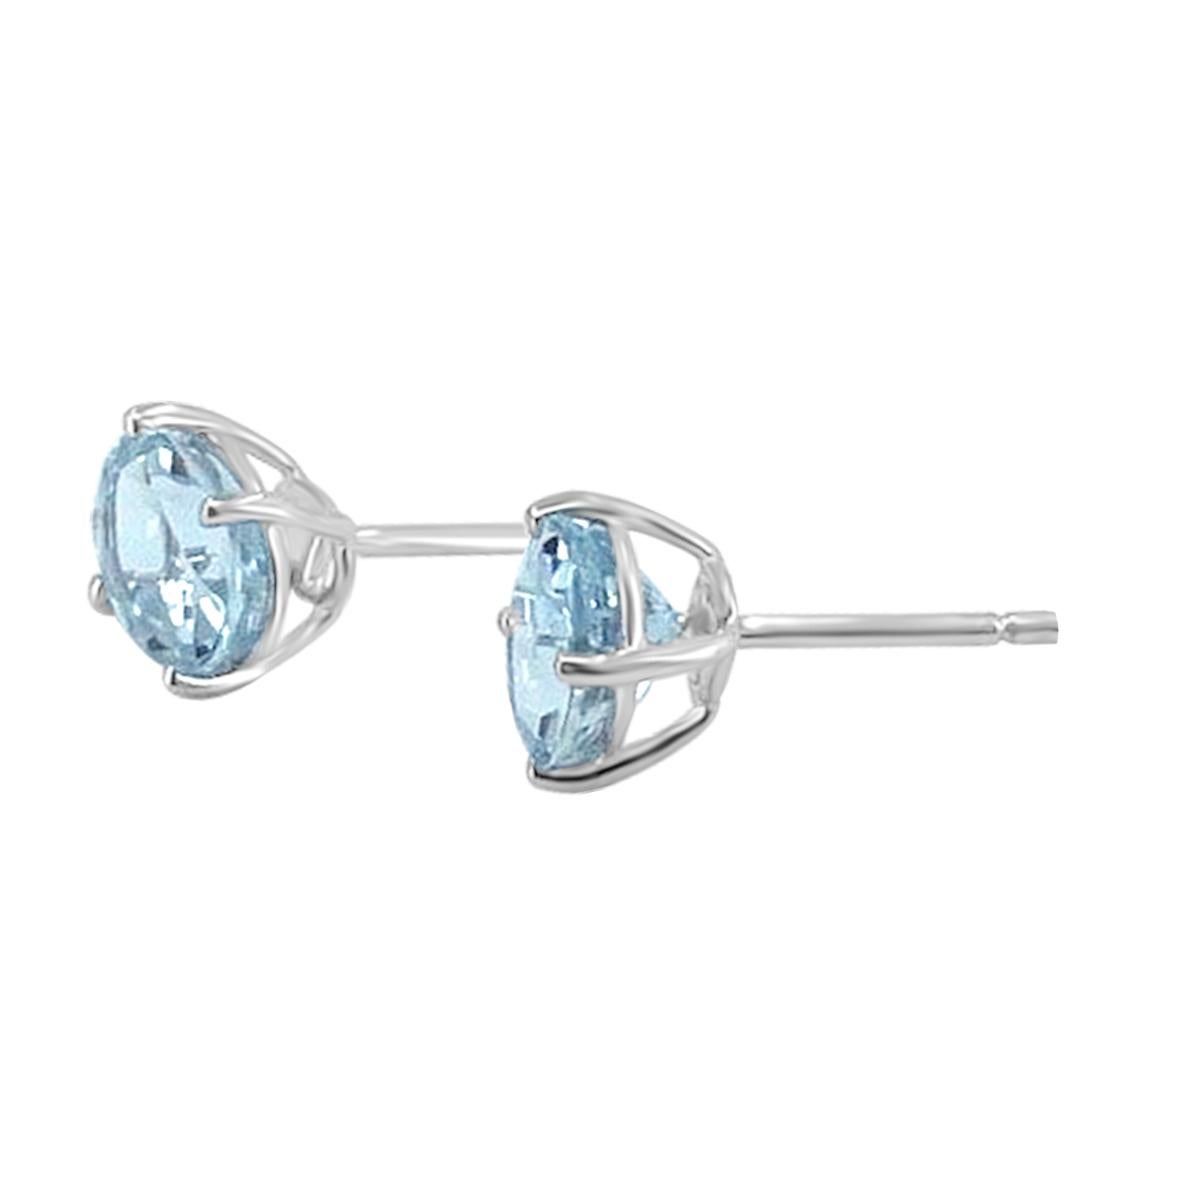 Basic And Beautiful.
These 8x6mm Stud Earring Are In Perfect Size And Color For Everyday Wear. These Stud Earring Features Simple Yet Eye Catching 2.17Cts Aquamarine Gemstones In 4Prong Setting Crafted In 14k White Gold. This Is Perfect Gift For